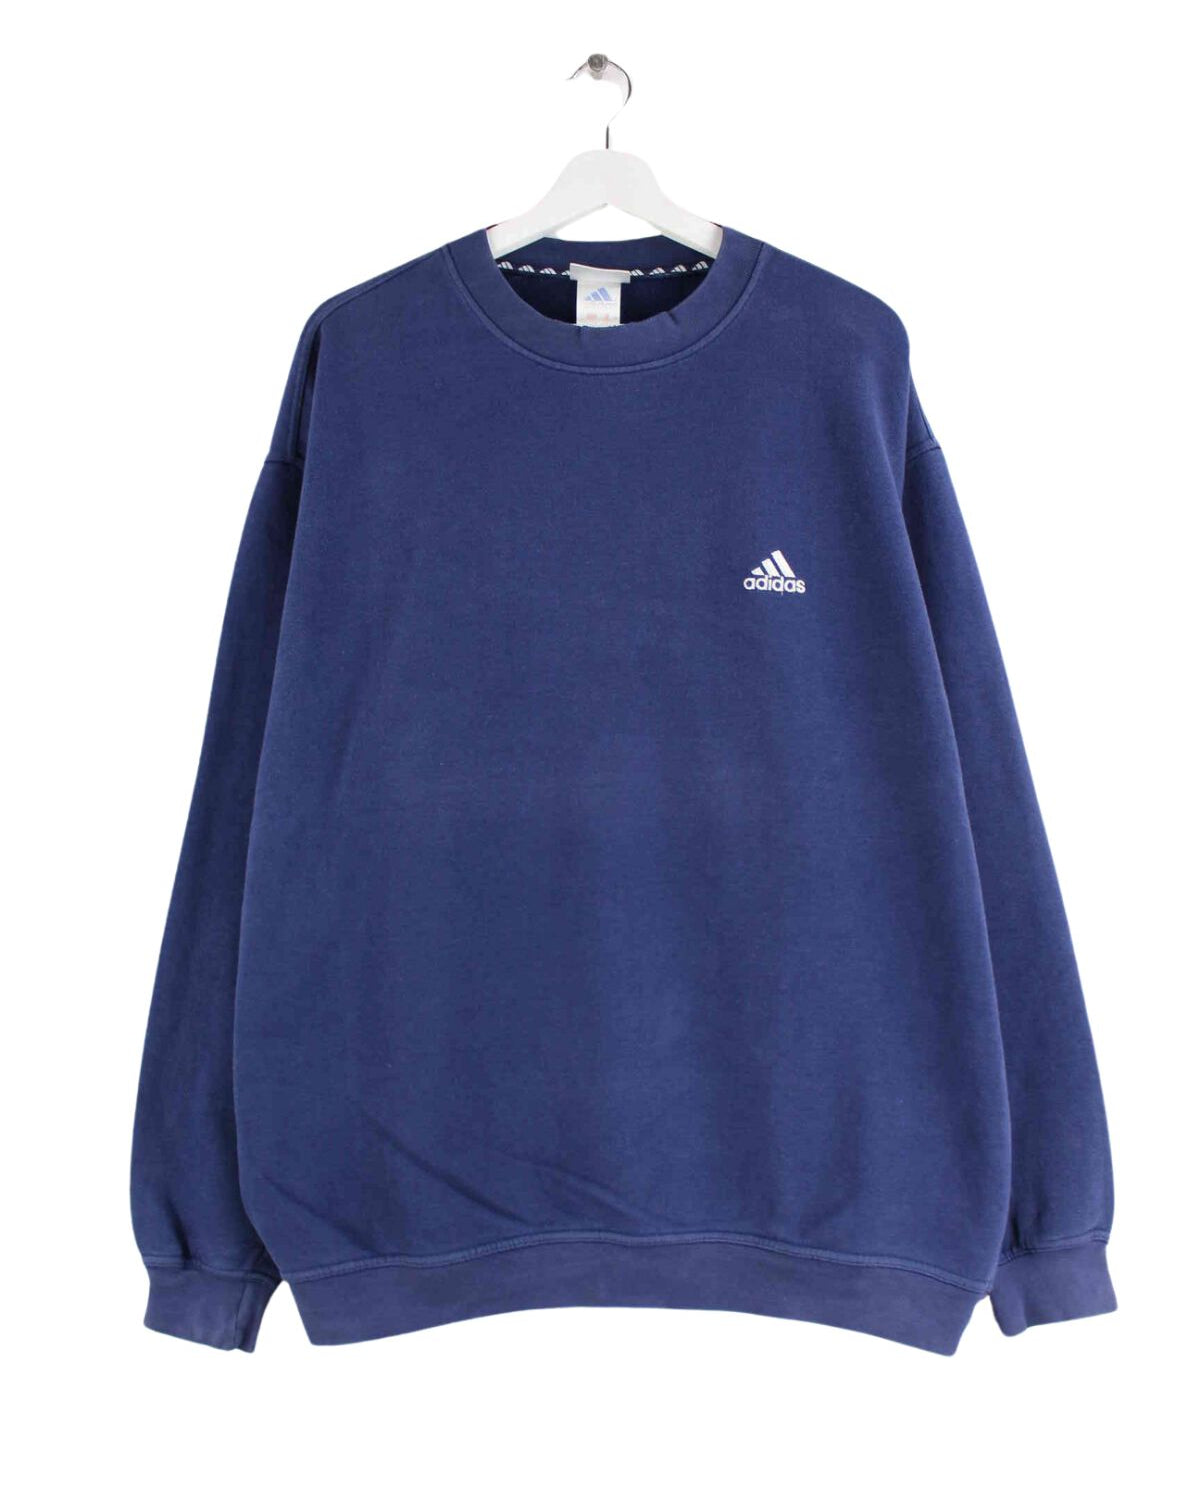 Adidas 90s Vintage Embroidered Sweater Blau XL (front image)